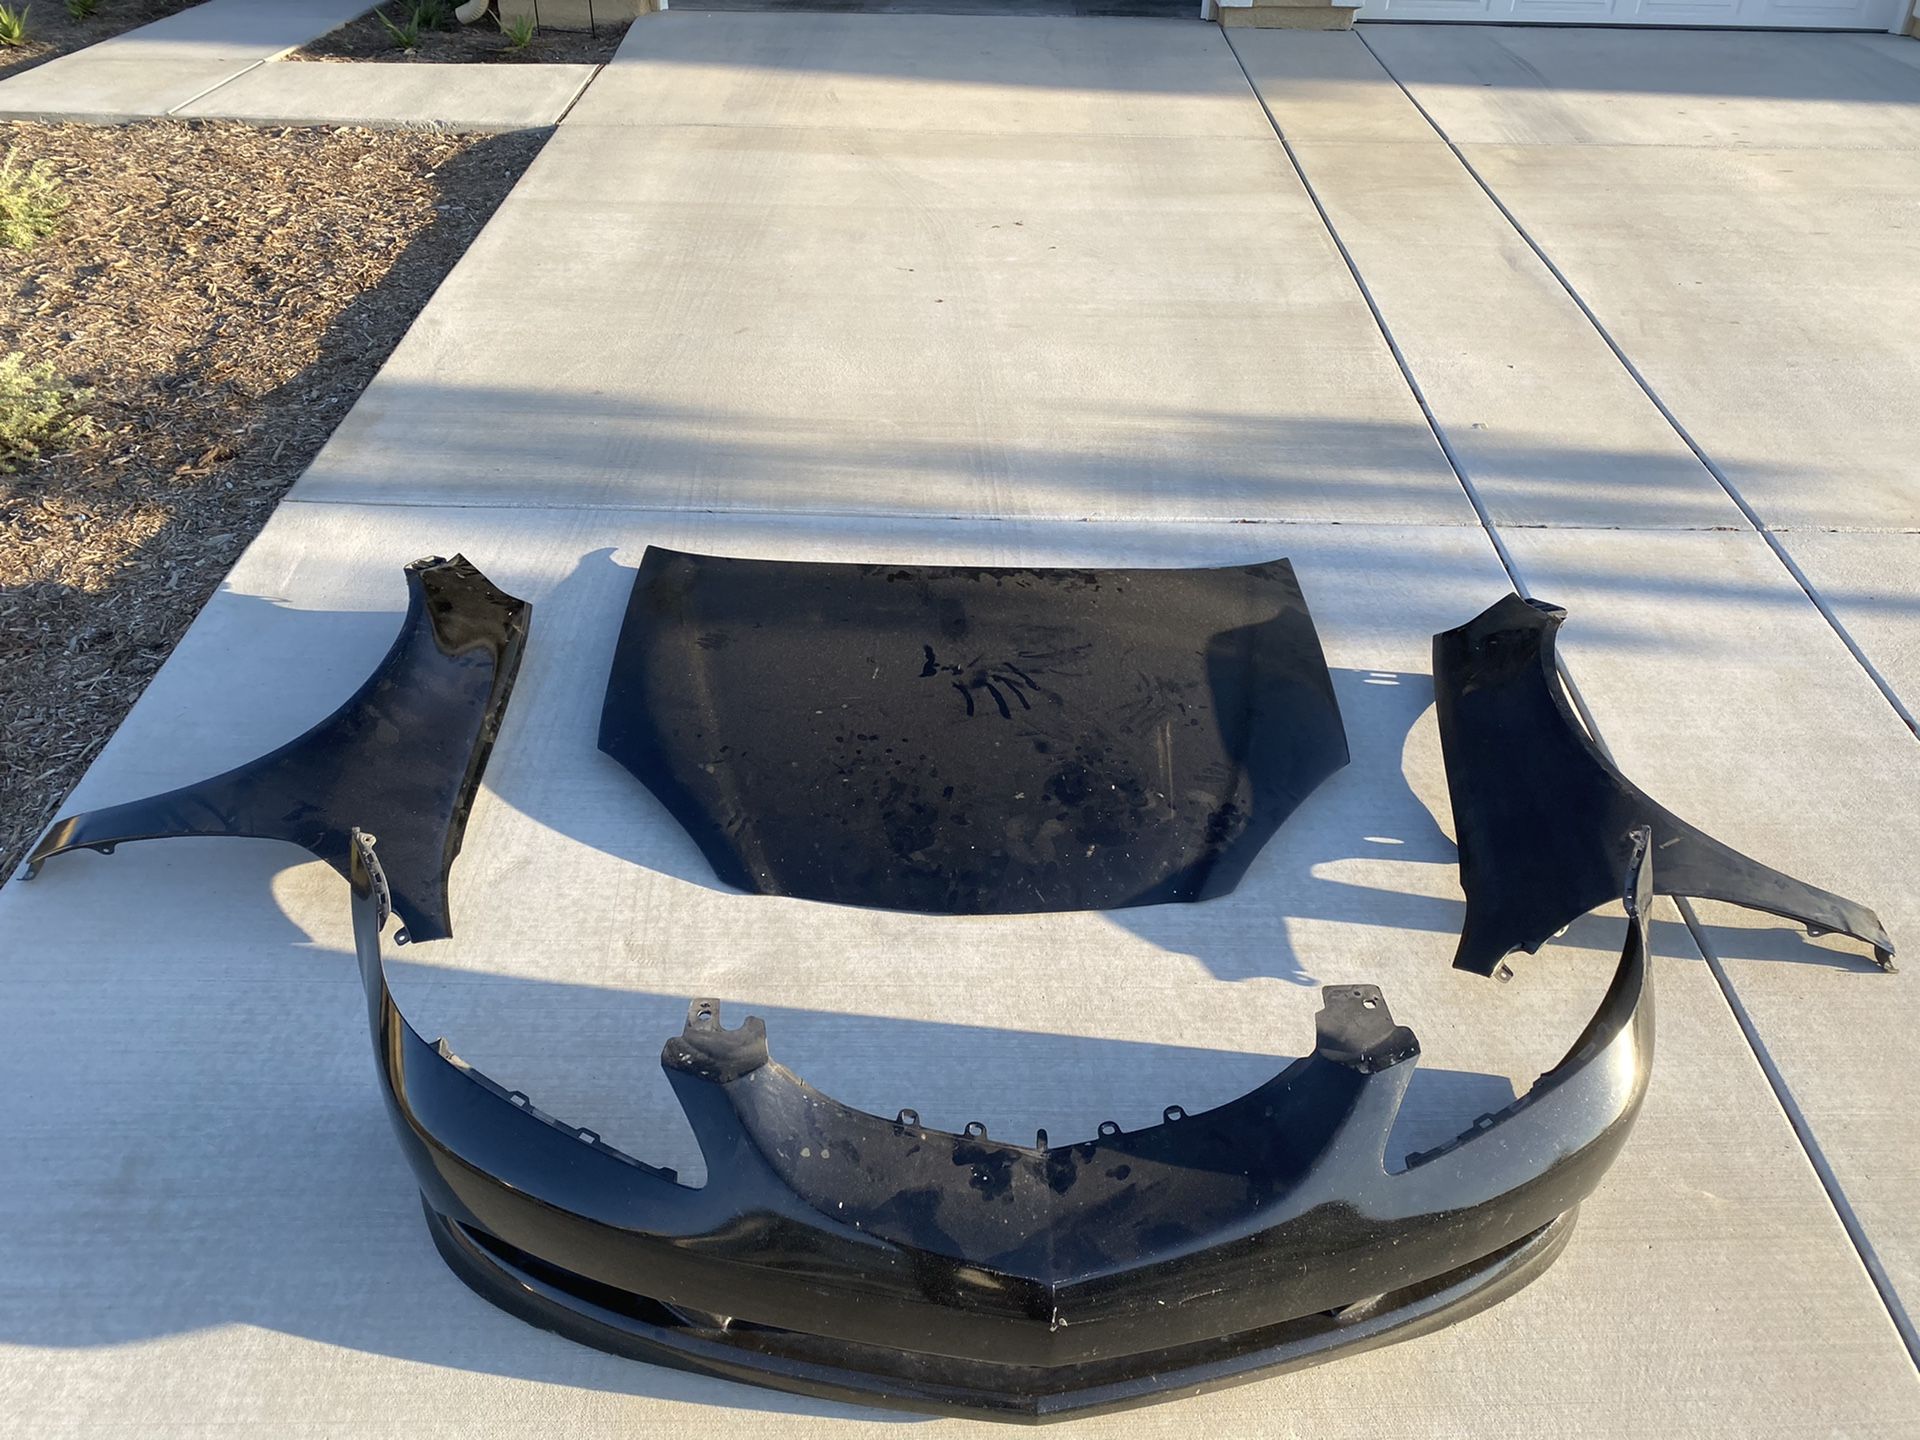 05-06 Acura RSX Front End (Bumper, Fenders & Hood)